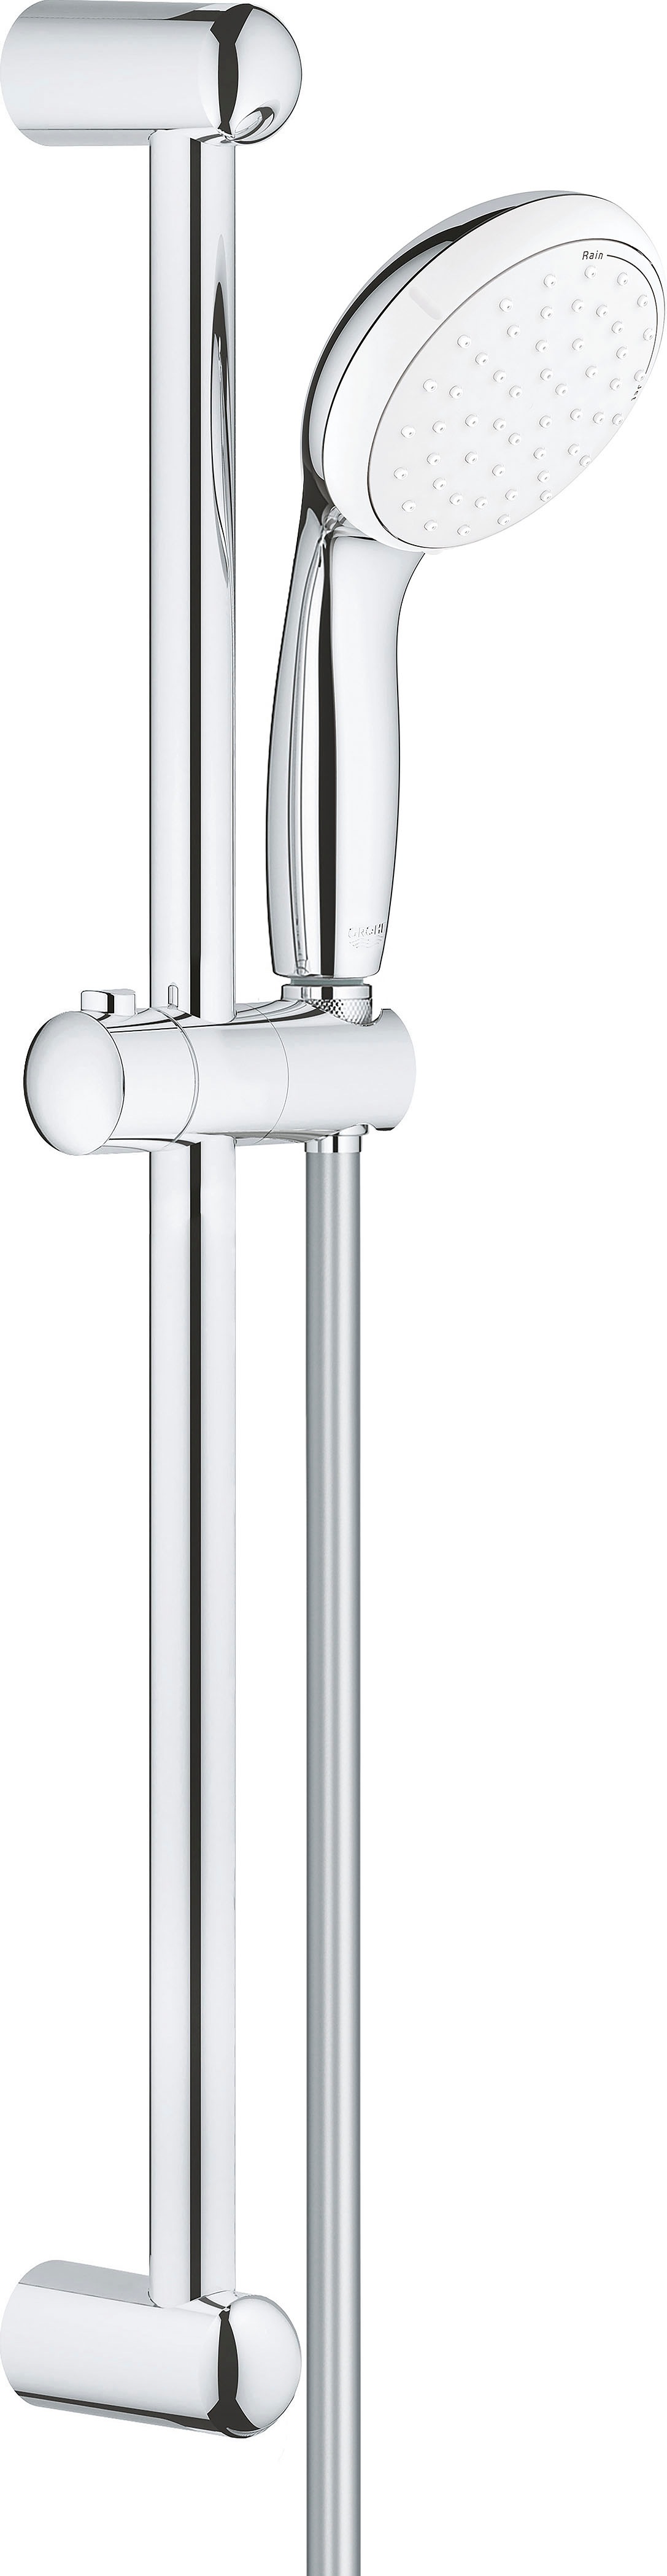 Grohe Duschsystem "Tempesta 100", (Packung)